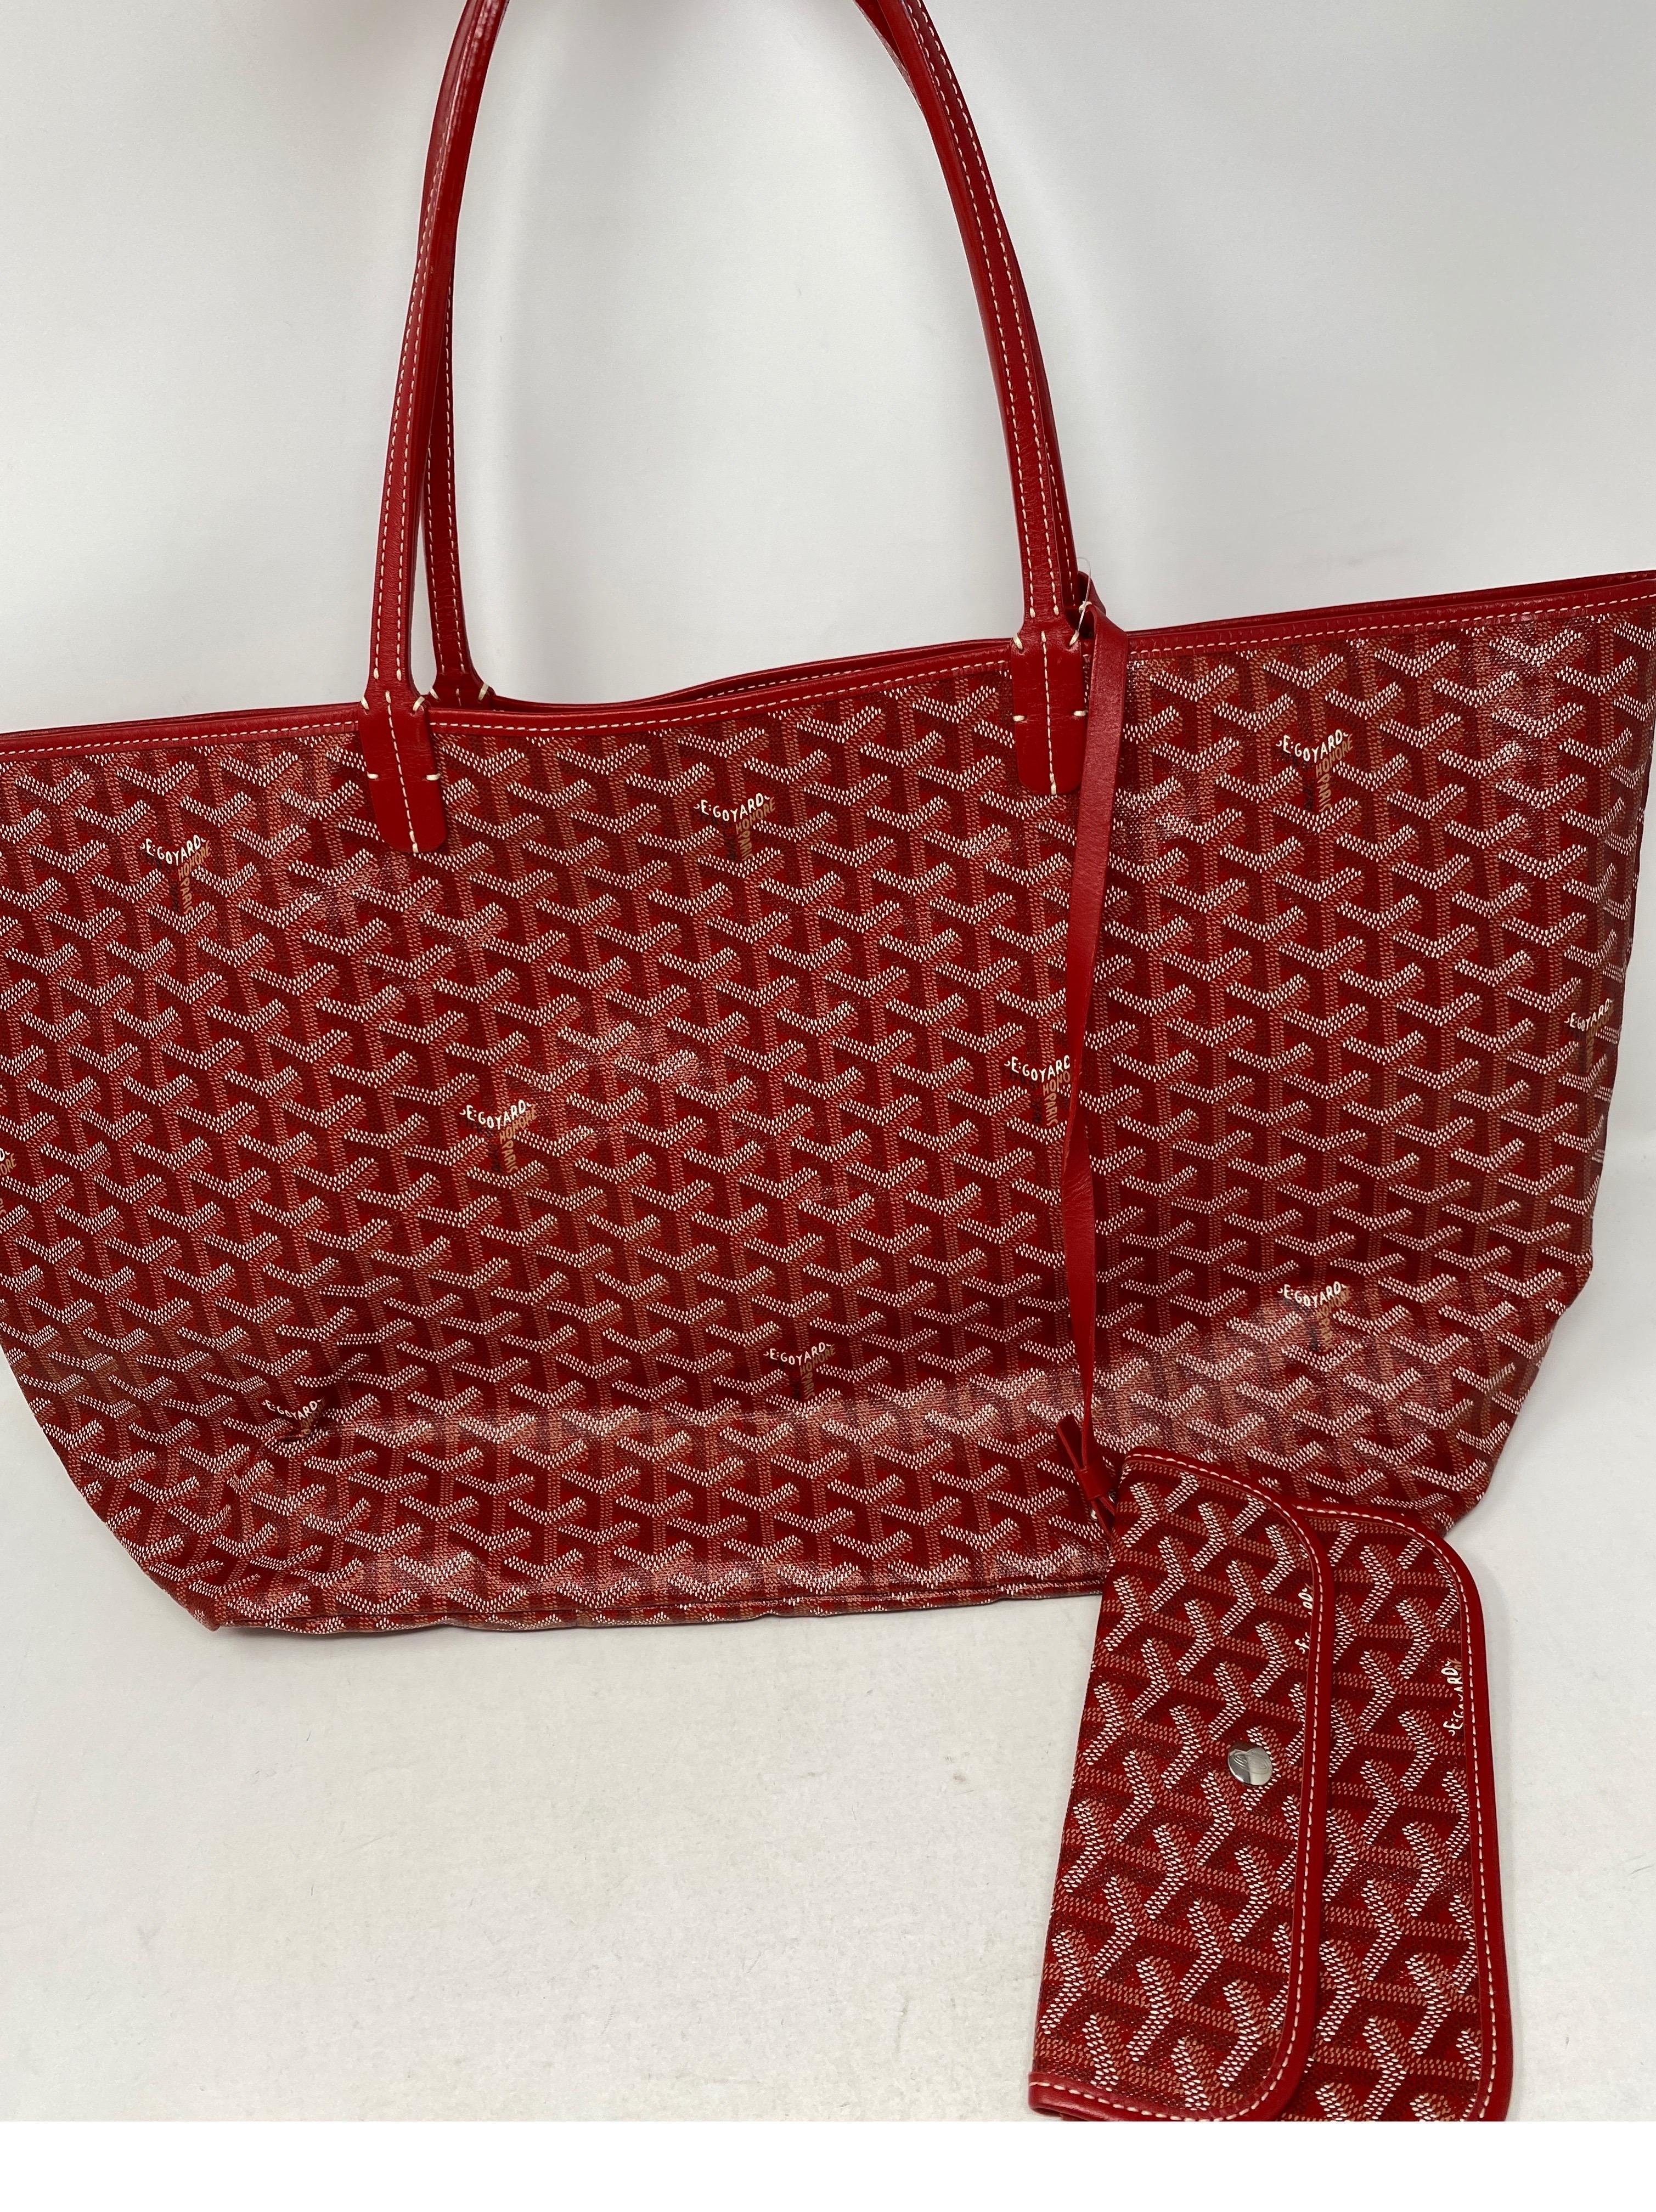 Goyard St. Louis GM Red Tote Bag. Mint like new condition. Most wanted Goyard bag in GM large size. Includes pouch. Guaranteed authentic.